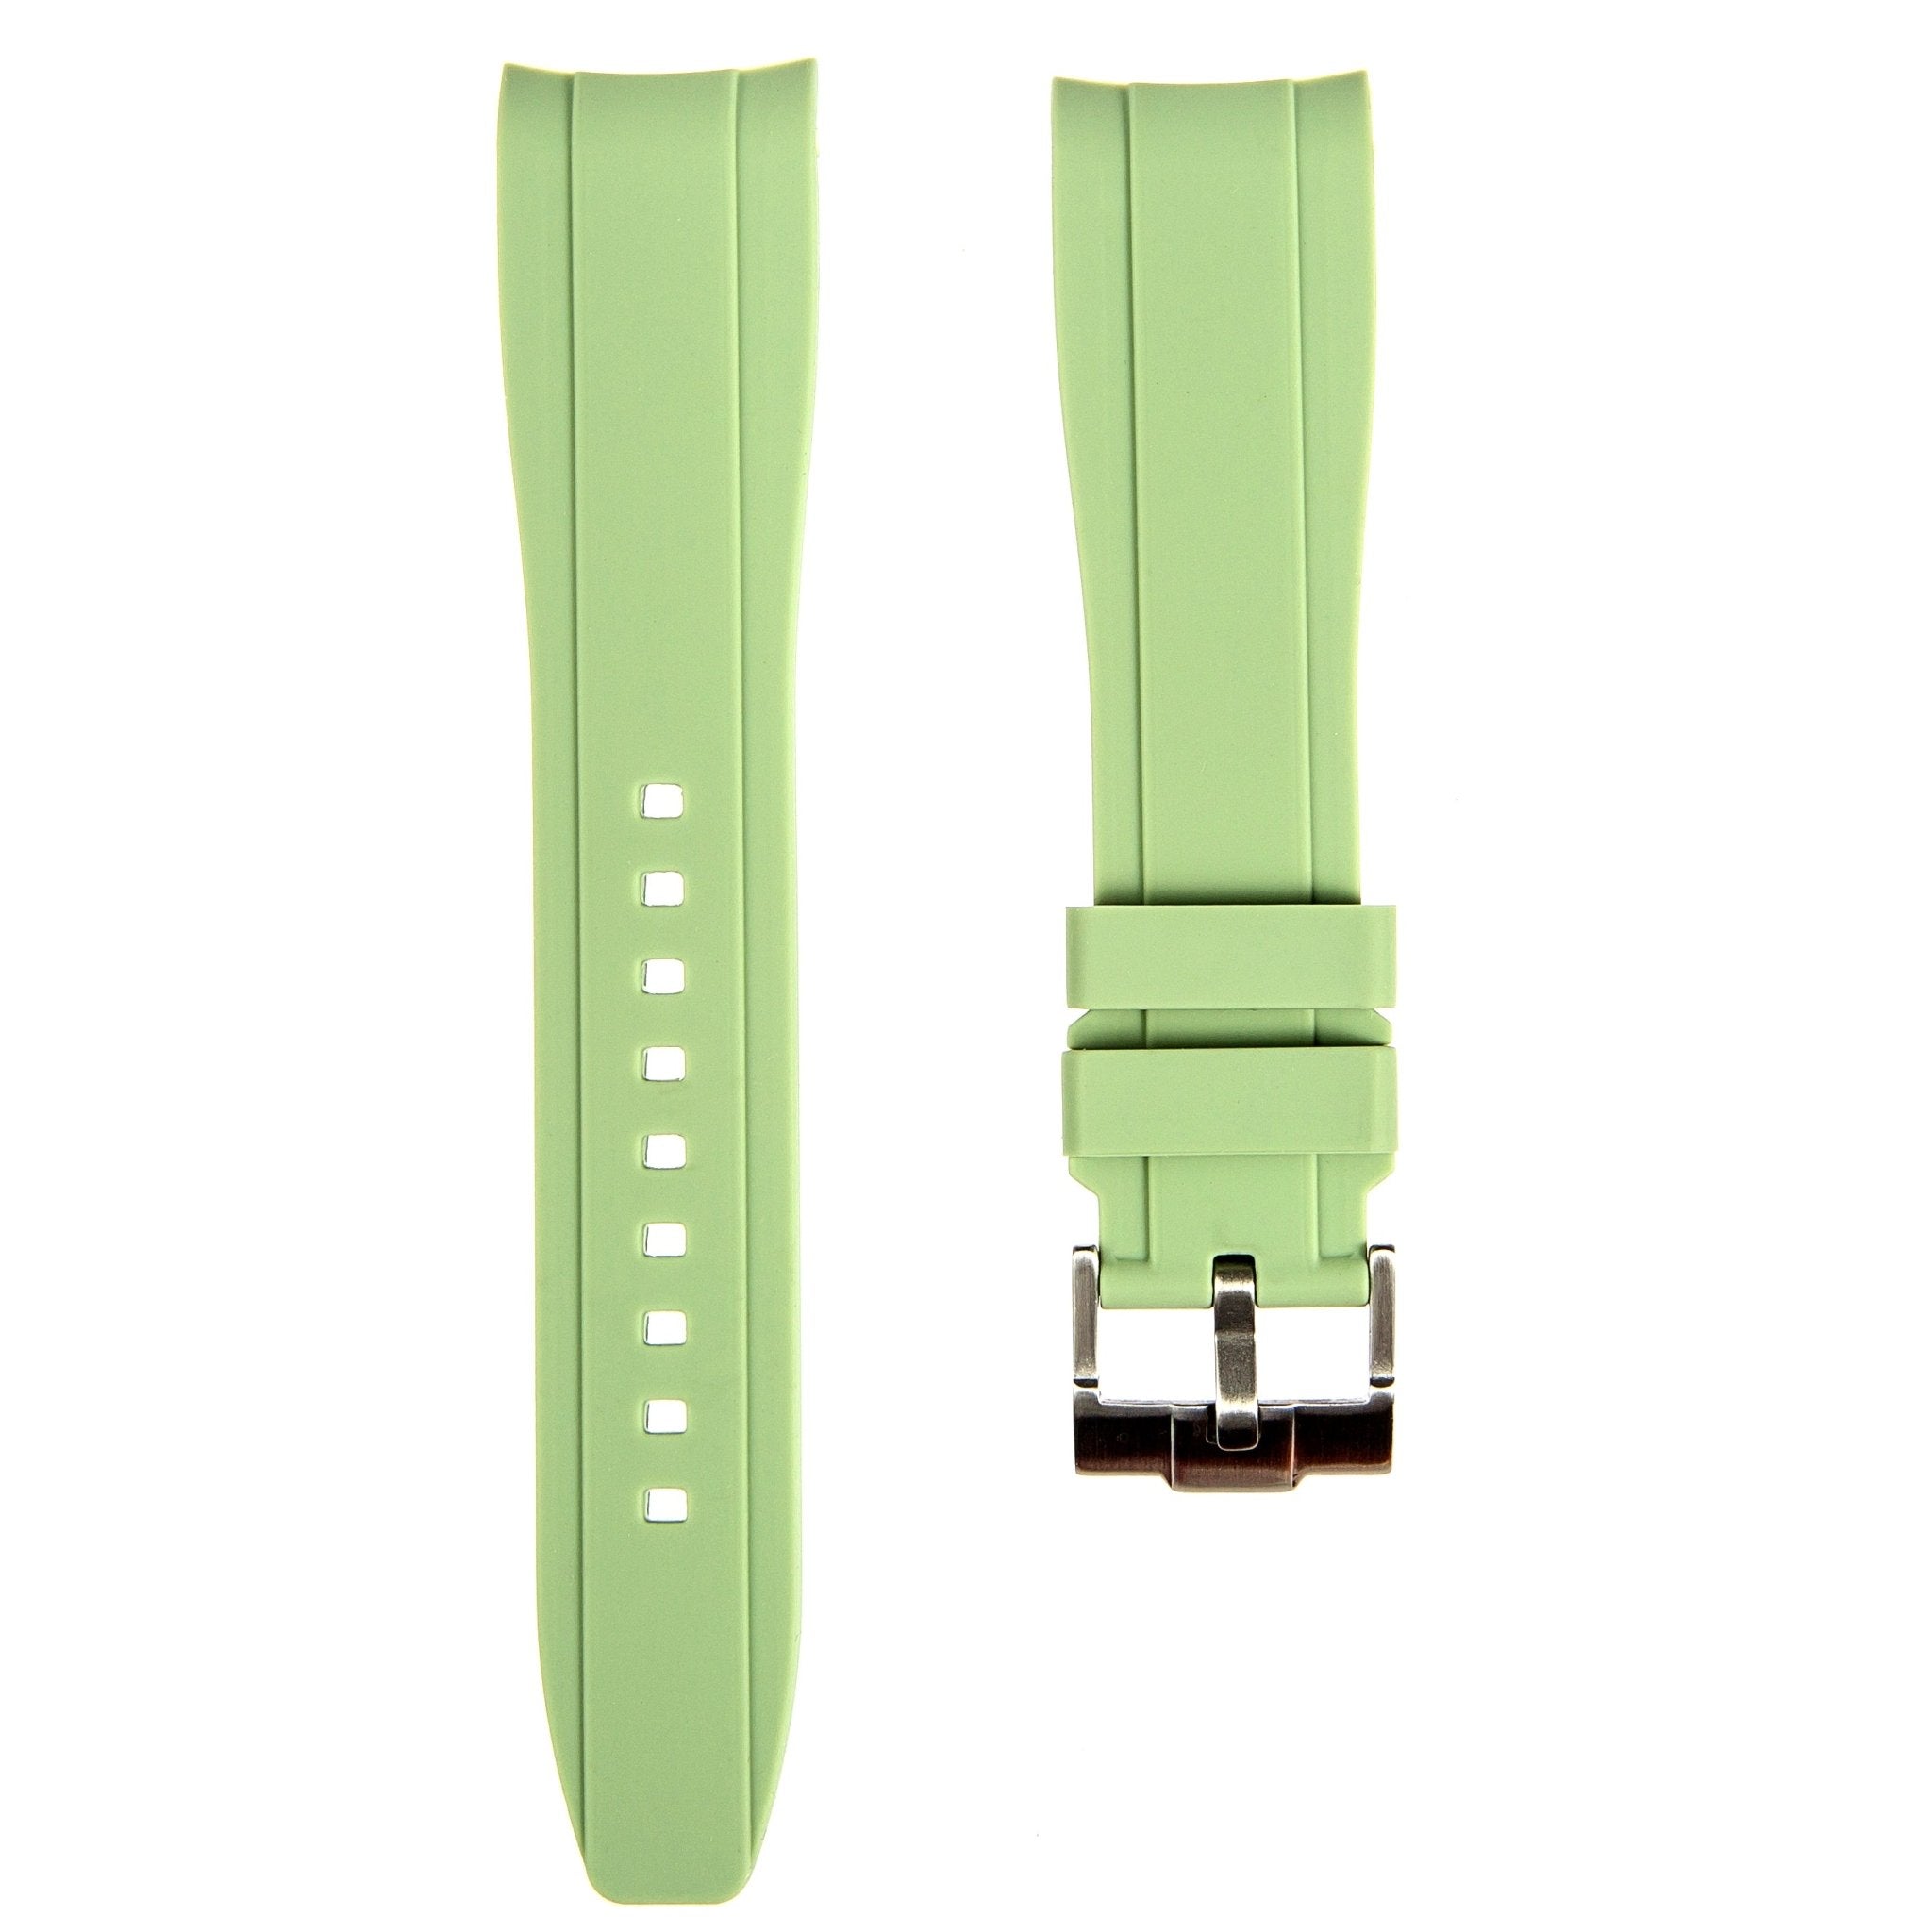 Curved End Soft Silicone Strap - Compatible with Omega x Swatch – Light Green (2418) -StrapSeeker